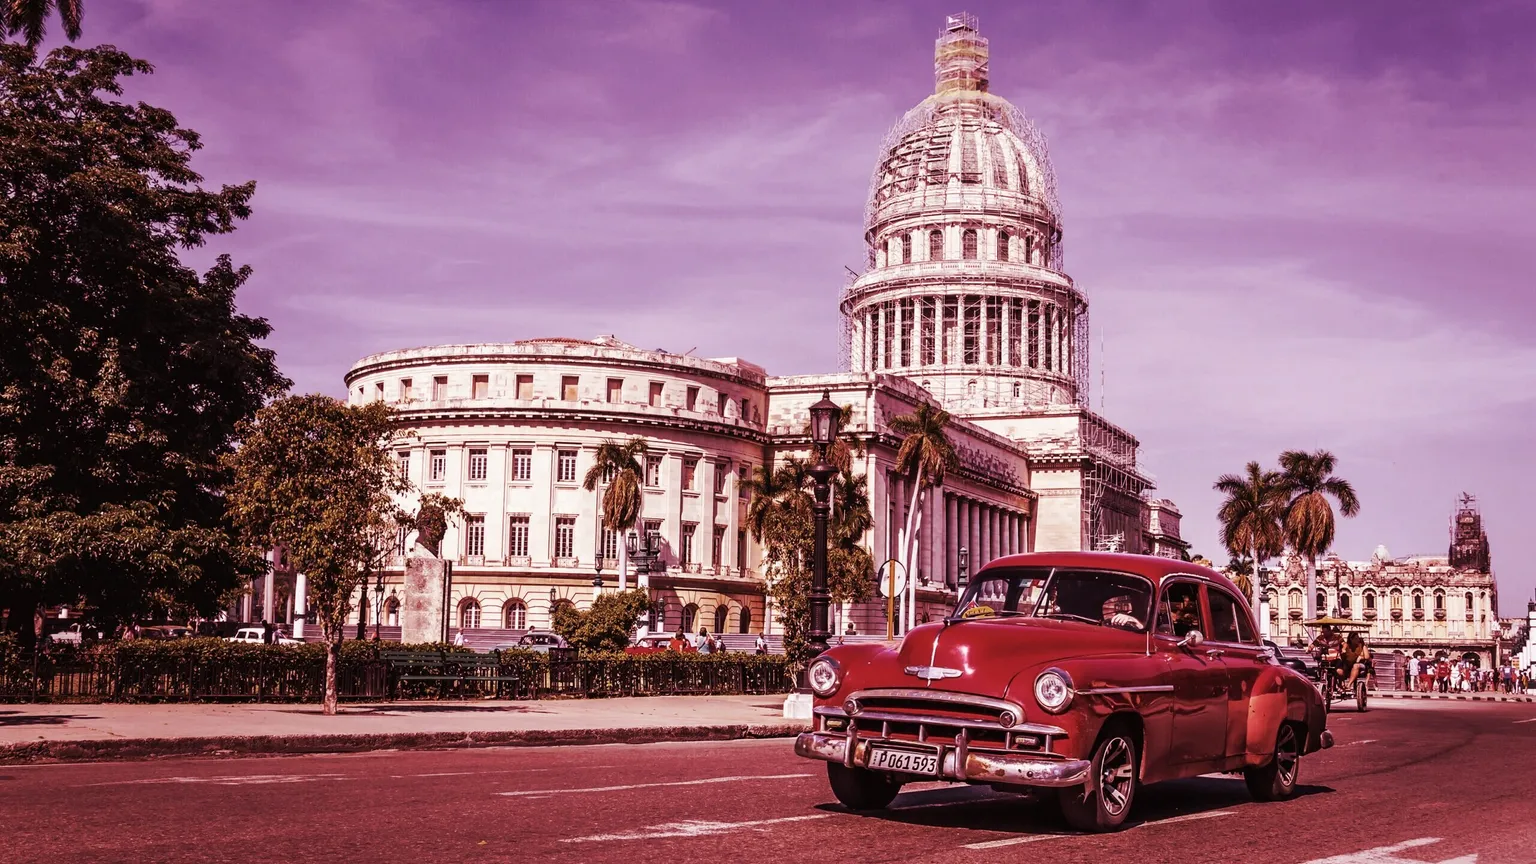 HAVANA, CUBA - DECEMBER 2, 2013: Old classic American maroon car rides in front of the Capitol. Before a new law issued on October 2011, cubans could only trade cars that were on the road before 1959.